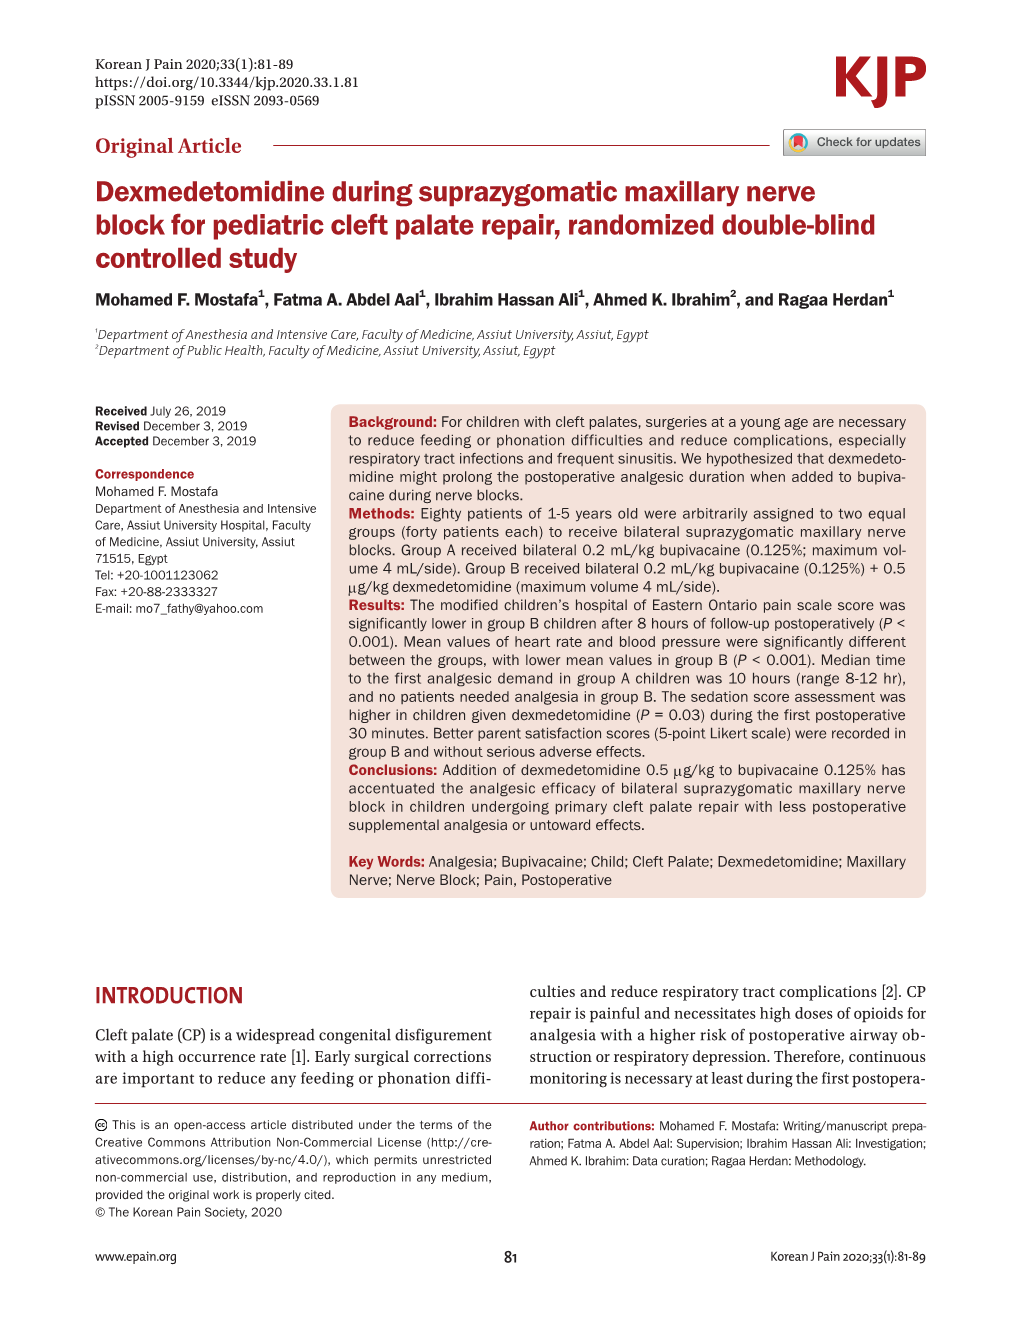 Dexmedetomidine During Suprazygomatic Maxillary Nerve Block for Pediatric Cleft Palate Repair, Randomized Double-Blind Controlled Study Mohamed F